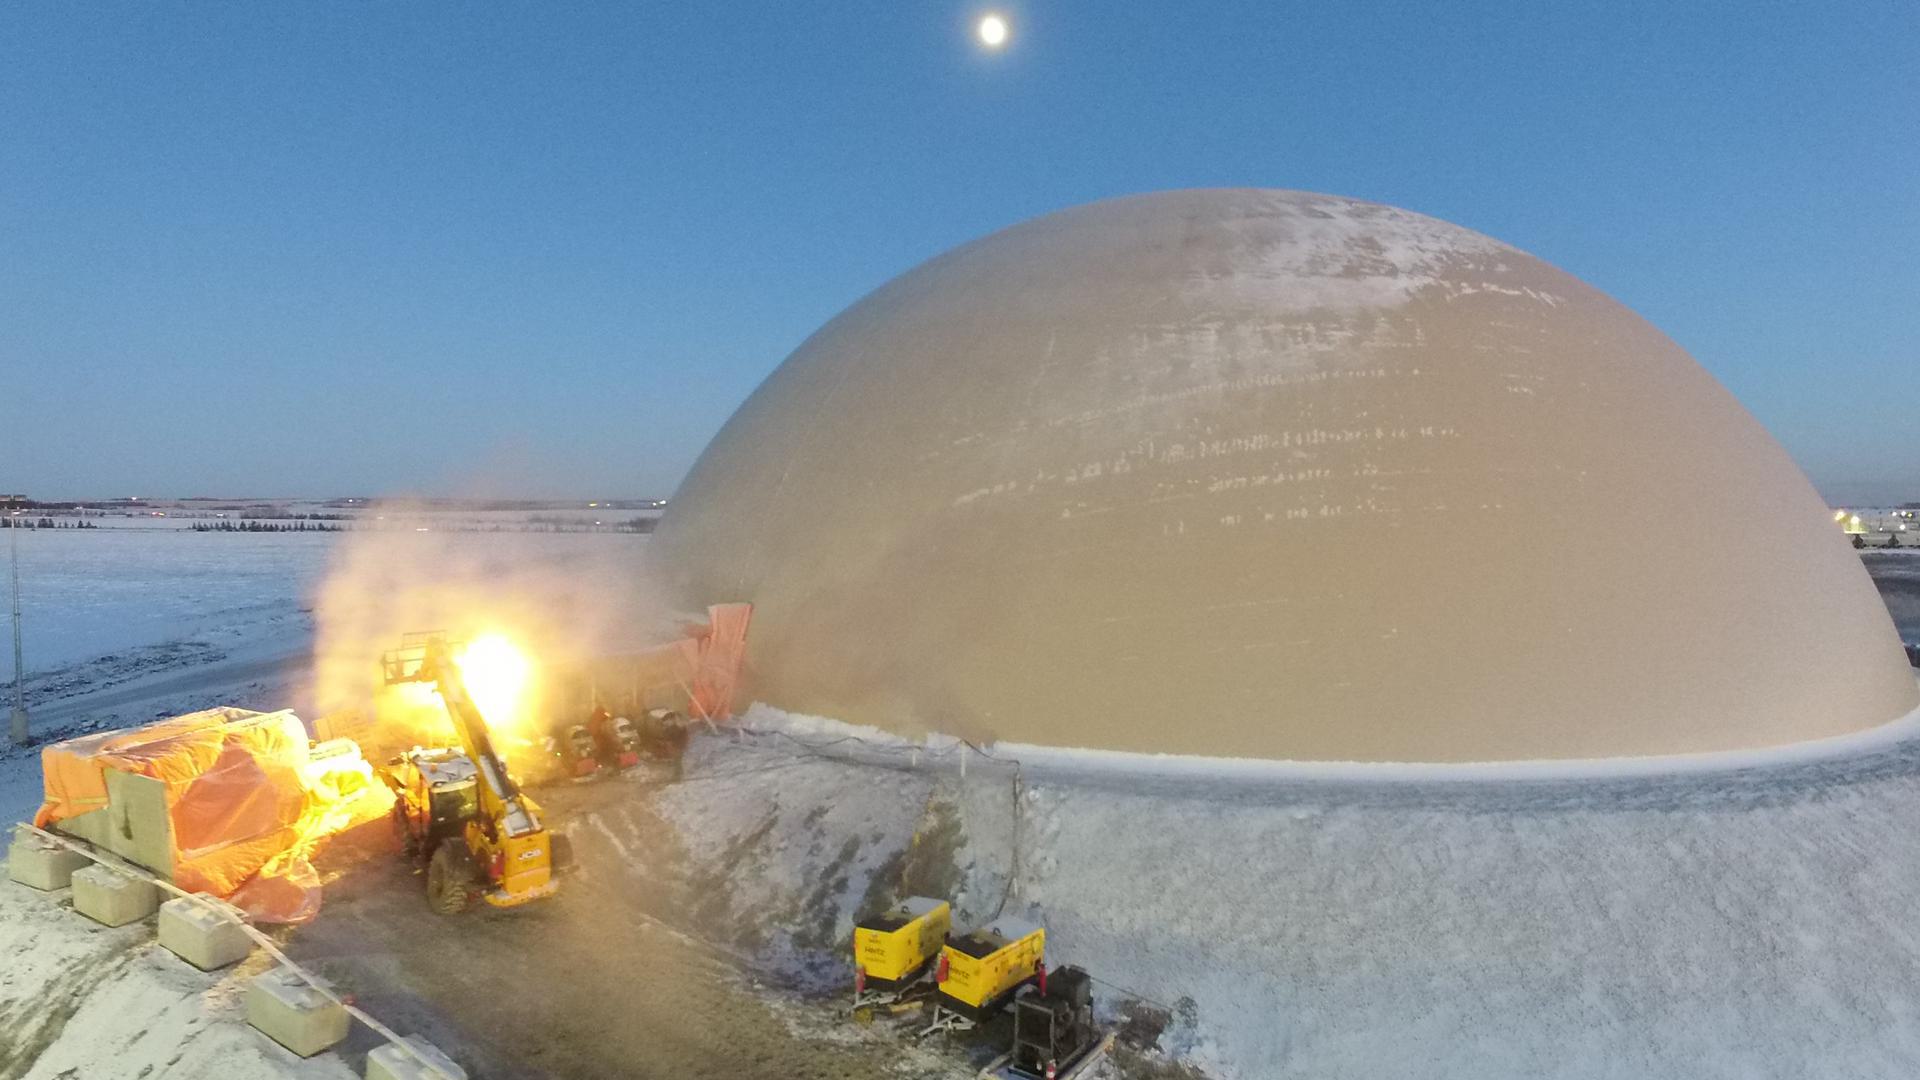 Snow highlights the elegant lines of the transverse Airform of this 182-foot diameter Monolithic Dome frac sand storage in Alberta, Canada